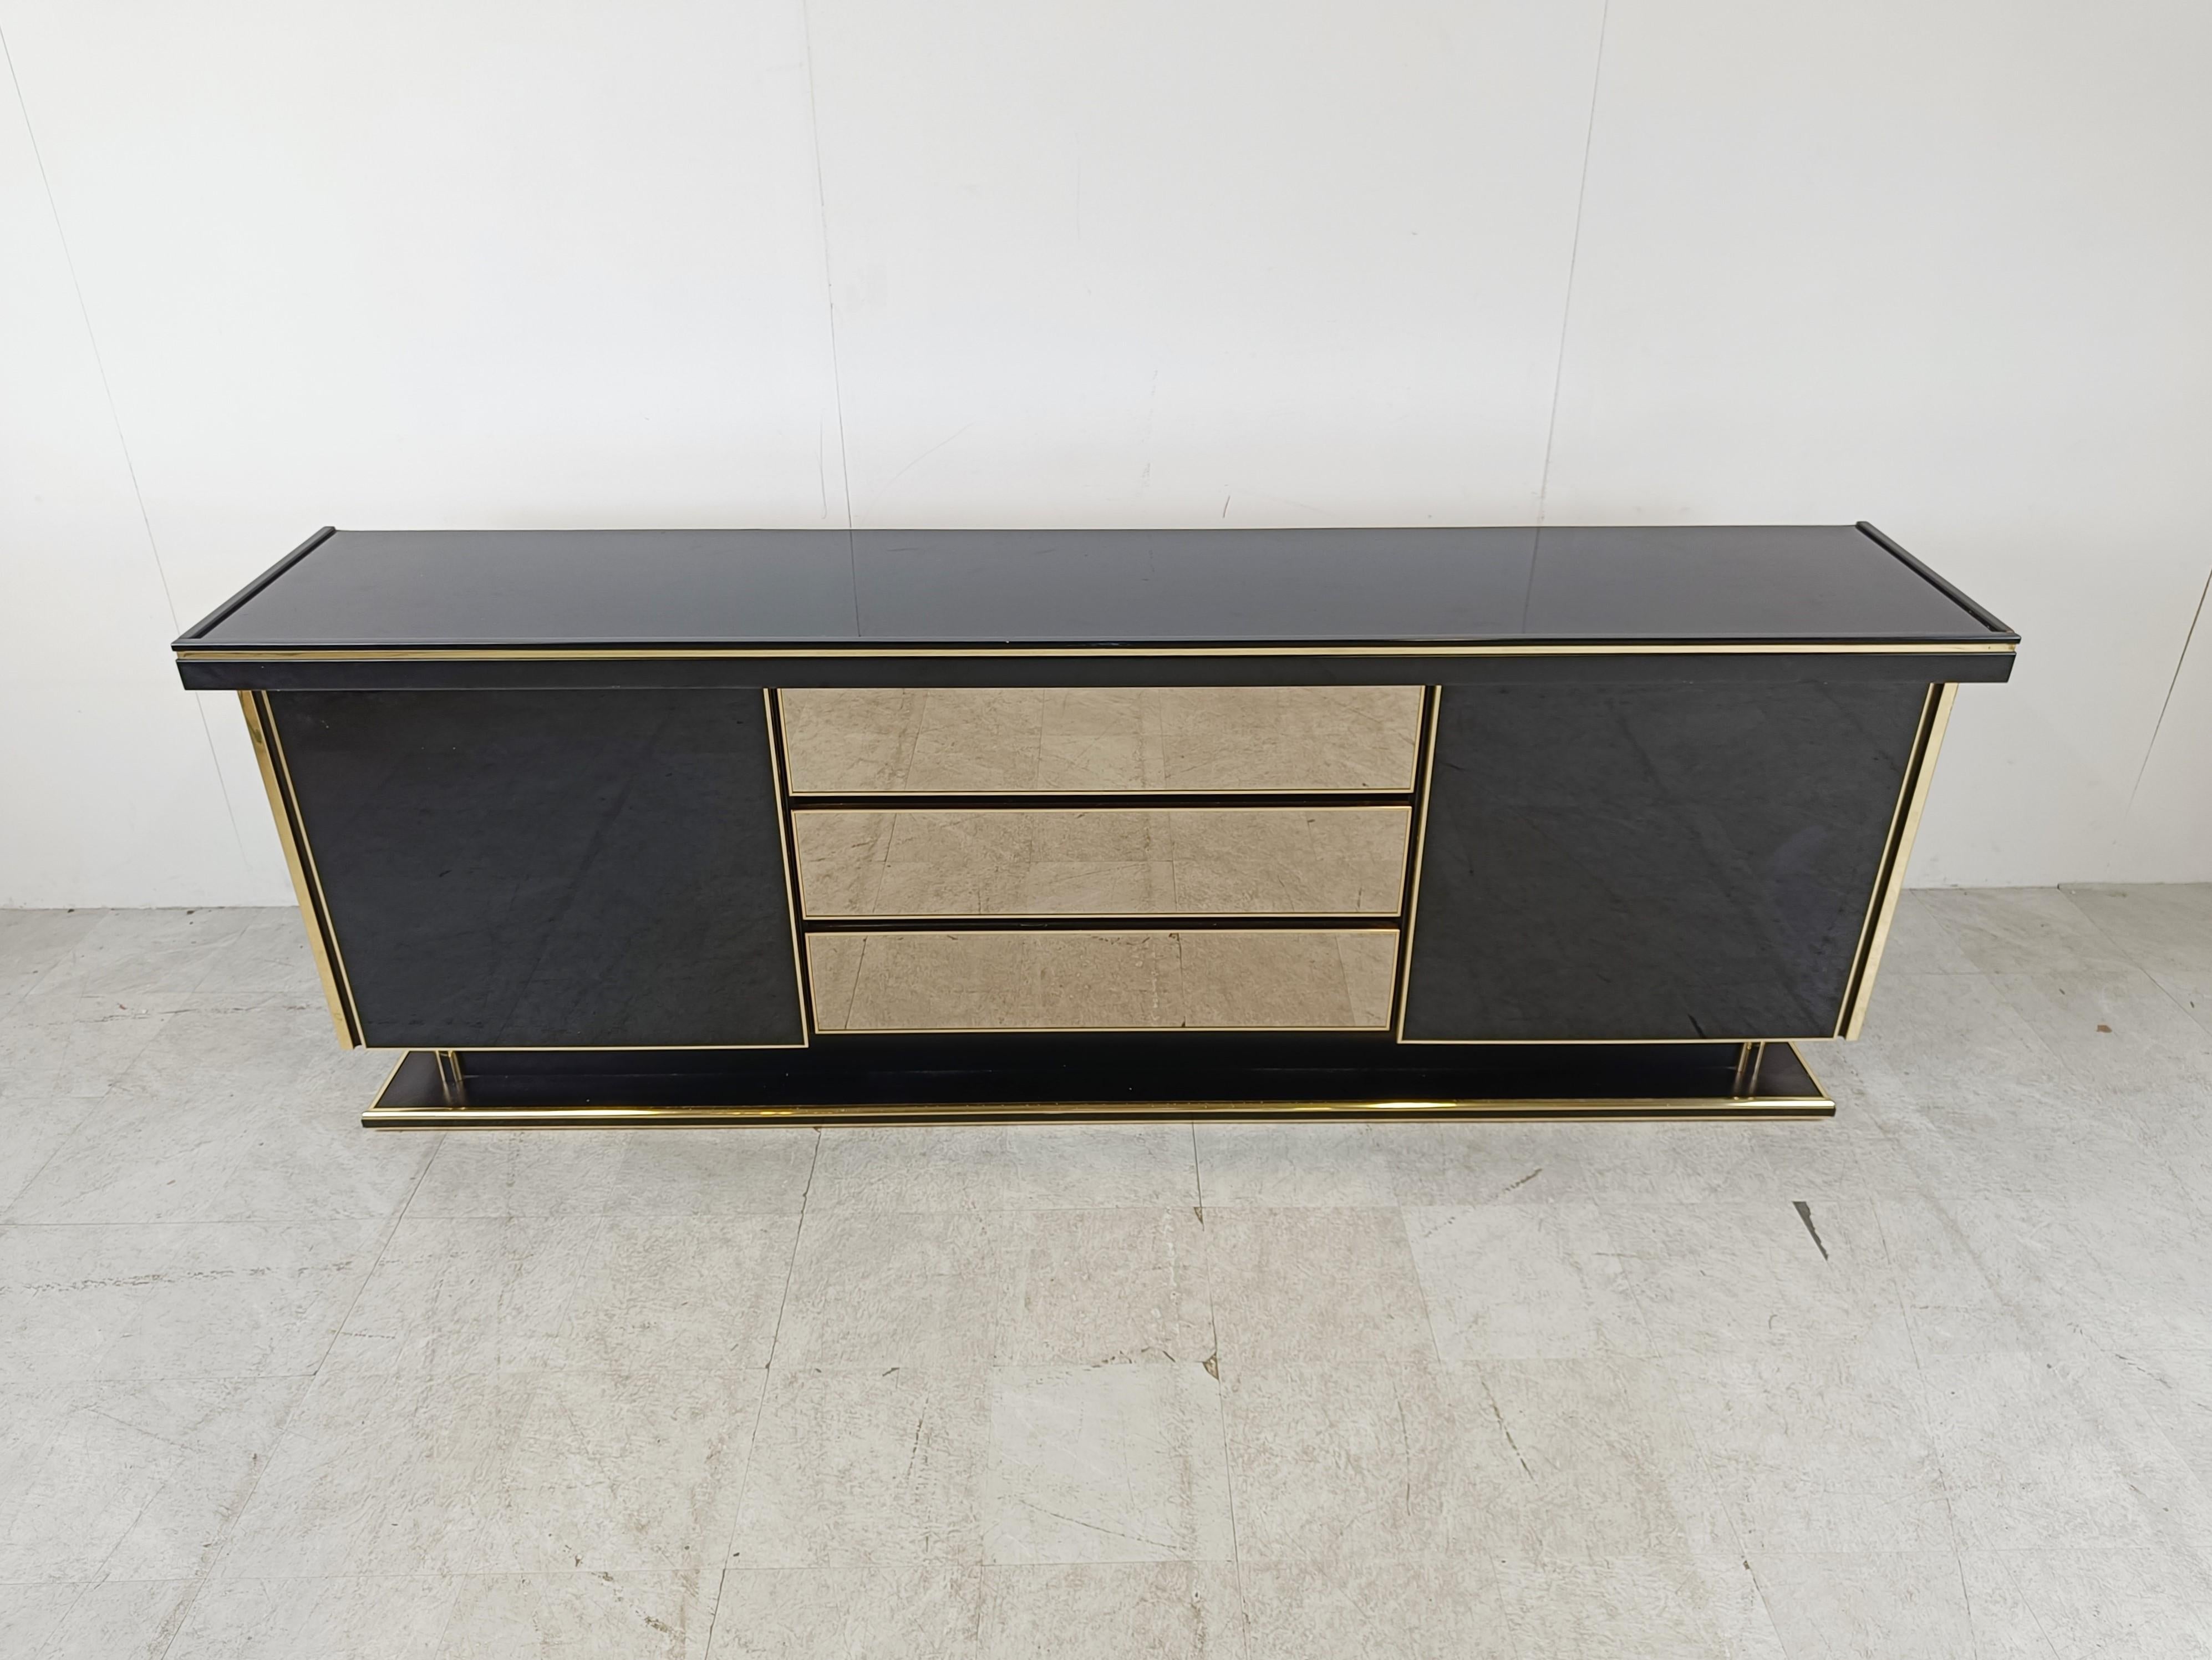 Luxurious seventies glamour sideboard consisting of two sliding doors and three smoked mirrored glass drawers.

The use of different high quality materials makes this piece a real eye catcher.

Good condition.

1970s - France

Dimensions:
Lenght: